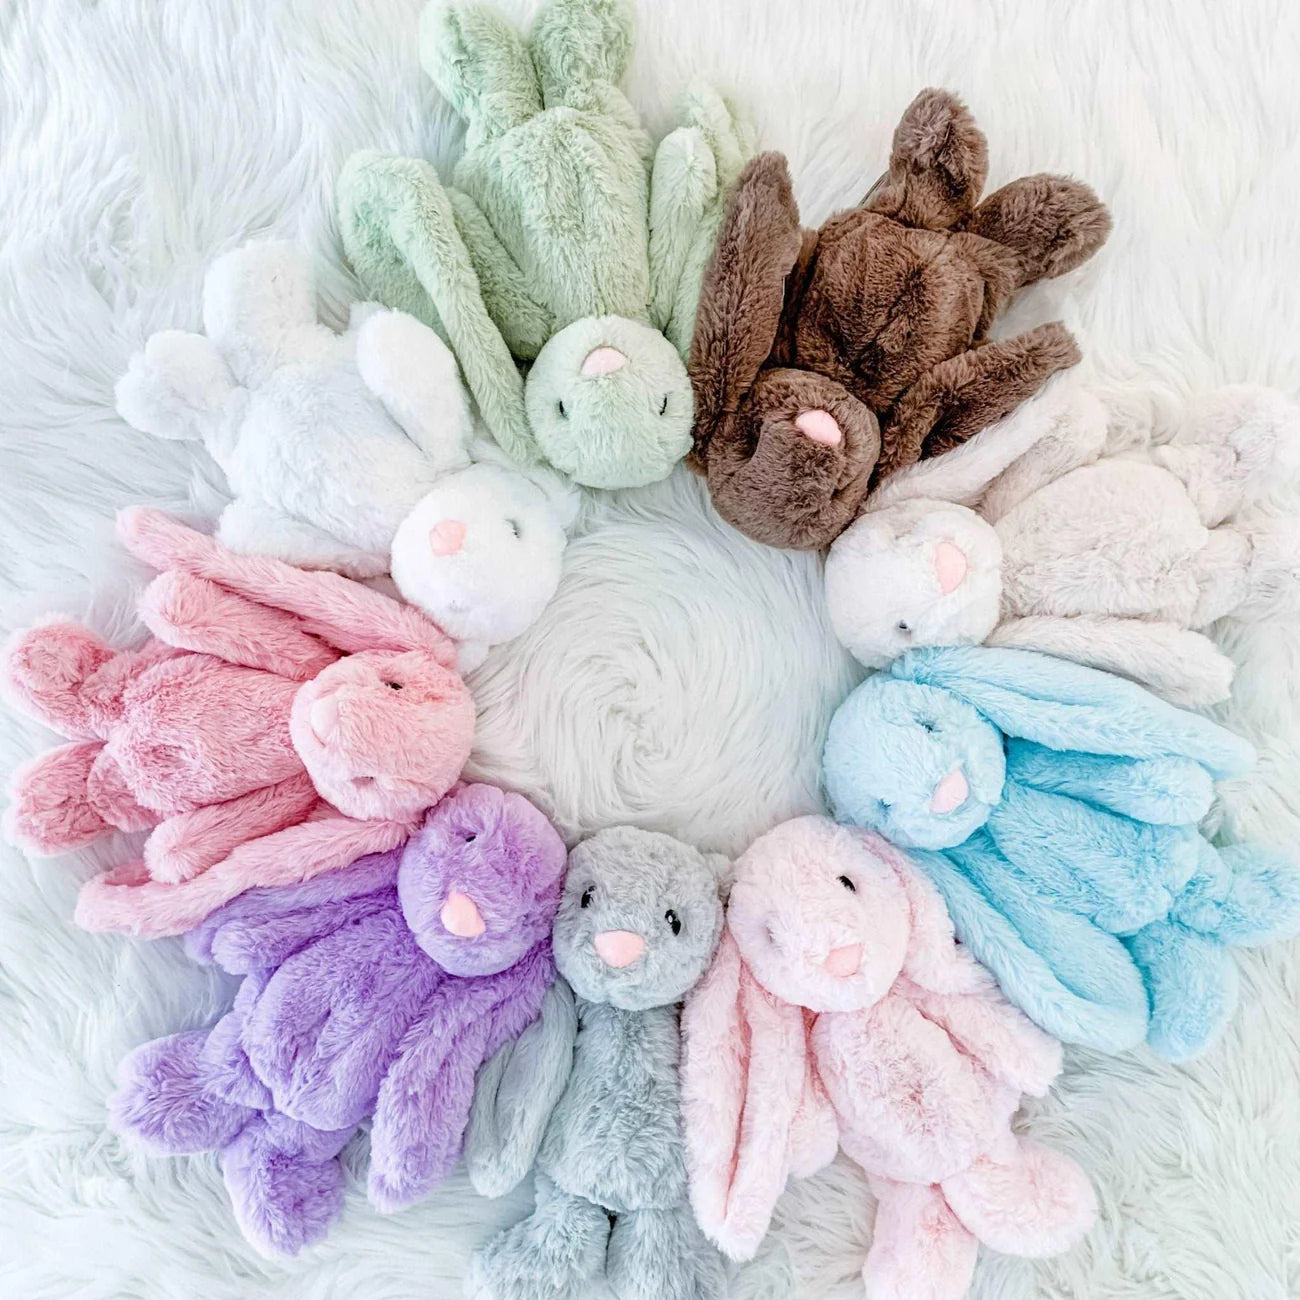 Lavender Love: The Soothing World of Xander, the Lavender-Infused Stuffed Animals